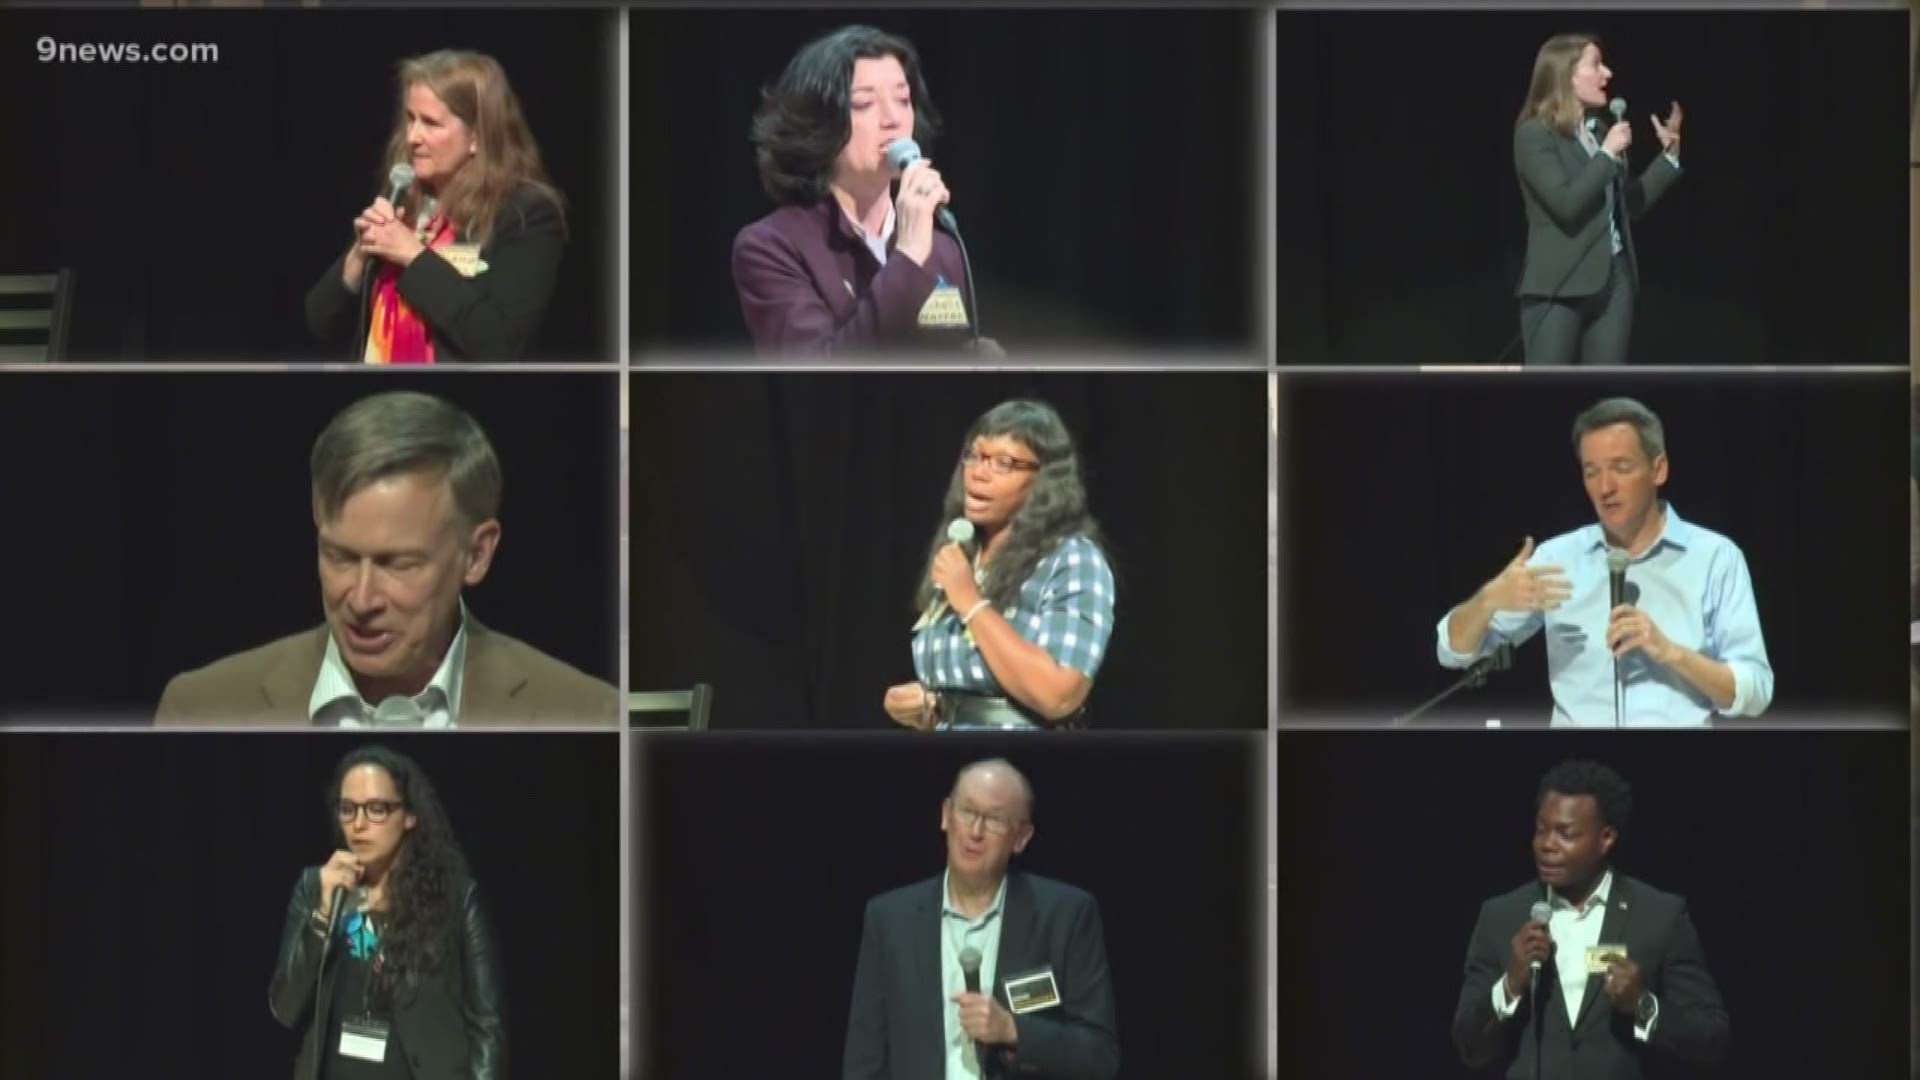 All the active Democratic candidates running for U.S. Senate were on the same stage in Longmont on Sunday – just not at the same time.